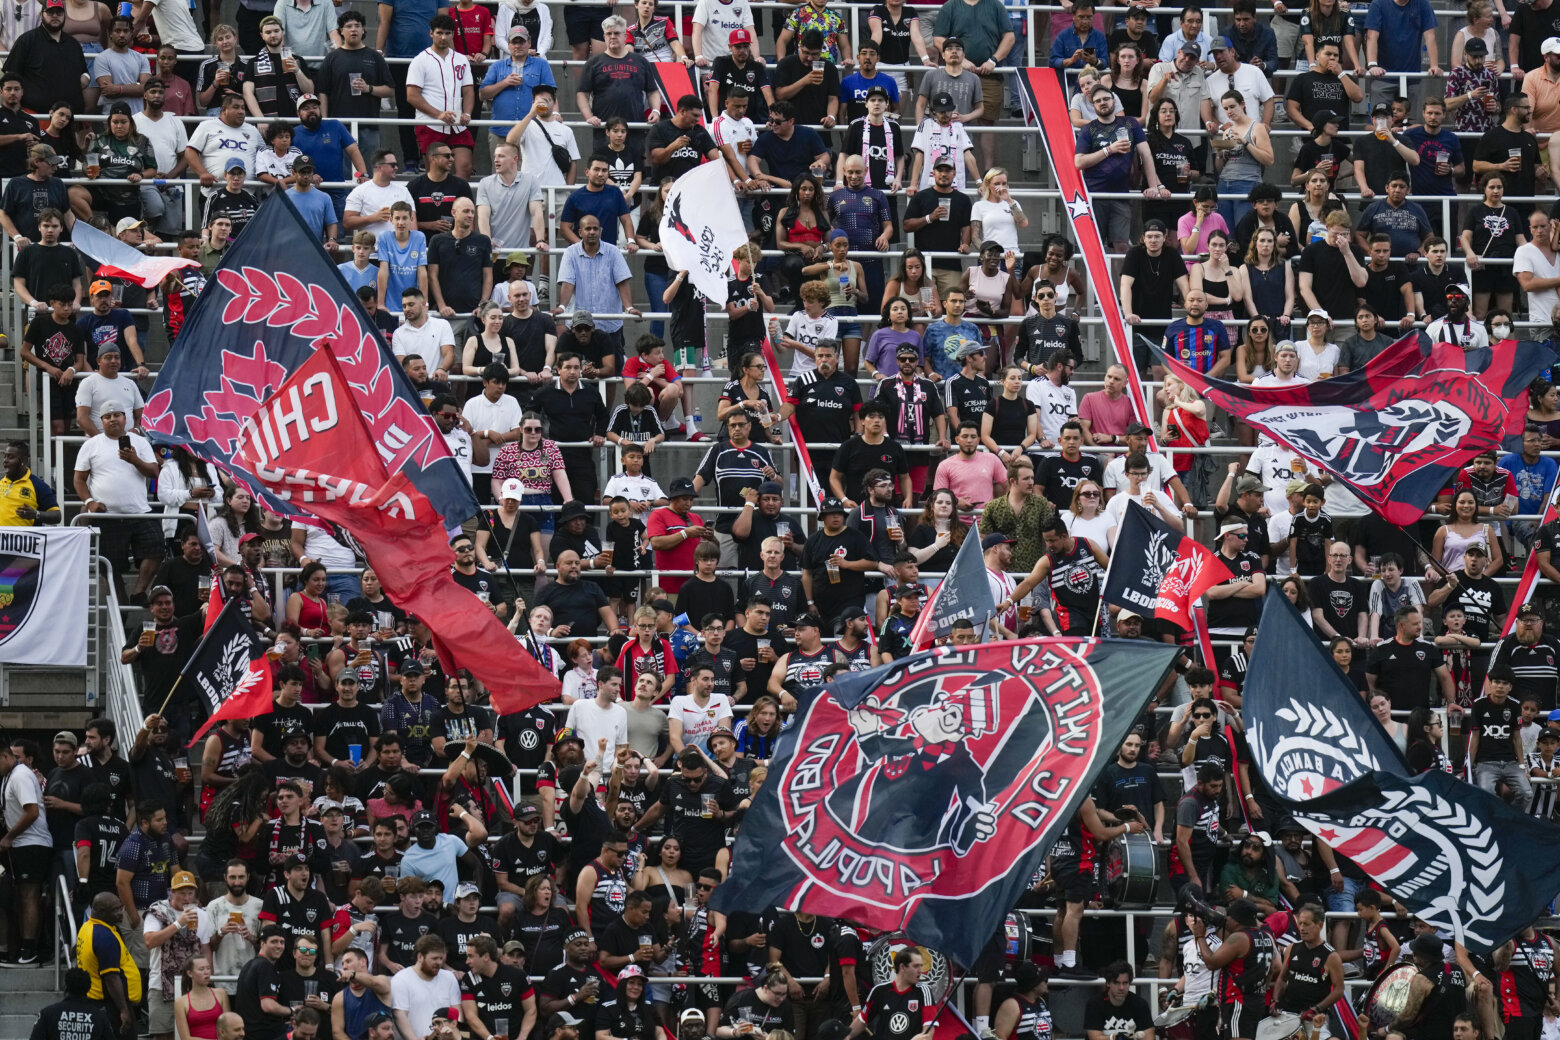 DC United supporters plan to continue protest against club’s Saudi Arabia trip